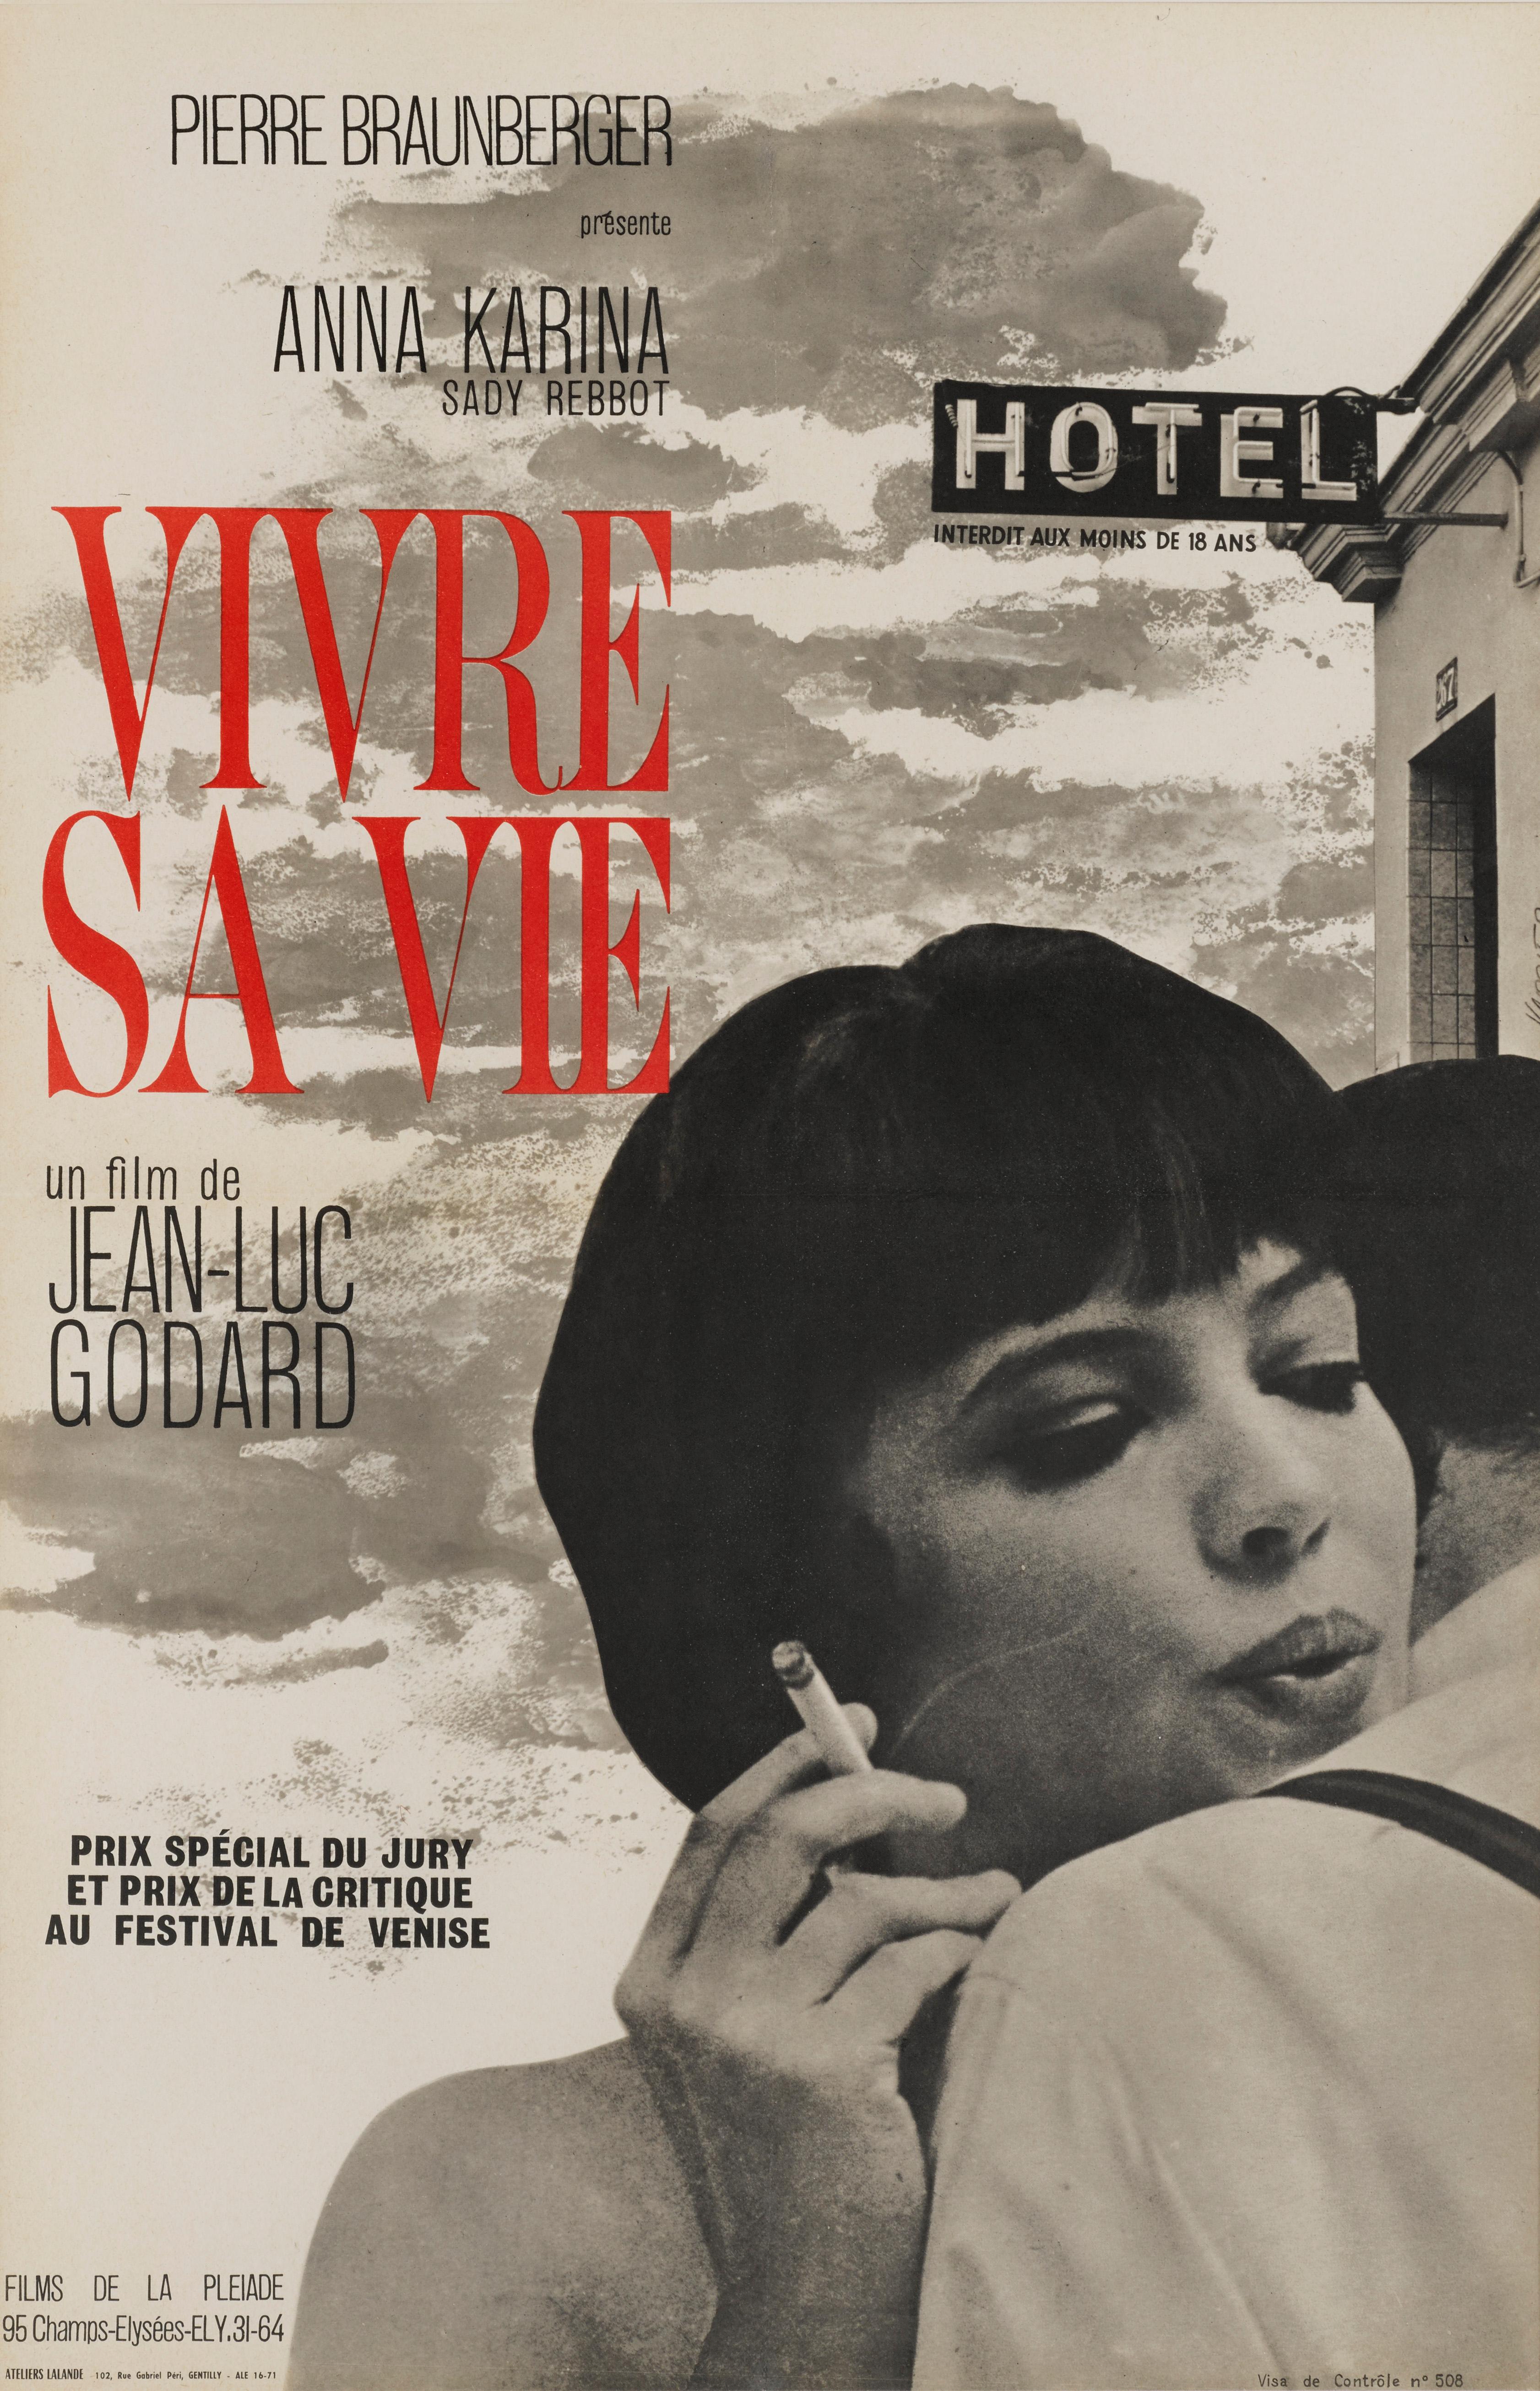 Original French movie poster for Jean-Luc Godard's Classic French new wave.
Film from (1962) Susan Sontag, author and cultural critic, has described Godard's achievement in Vivre Sa Vie as 